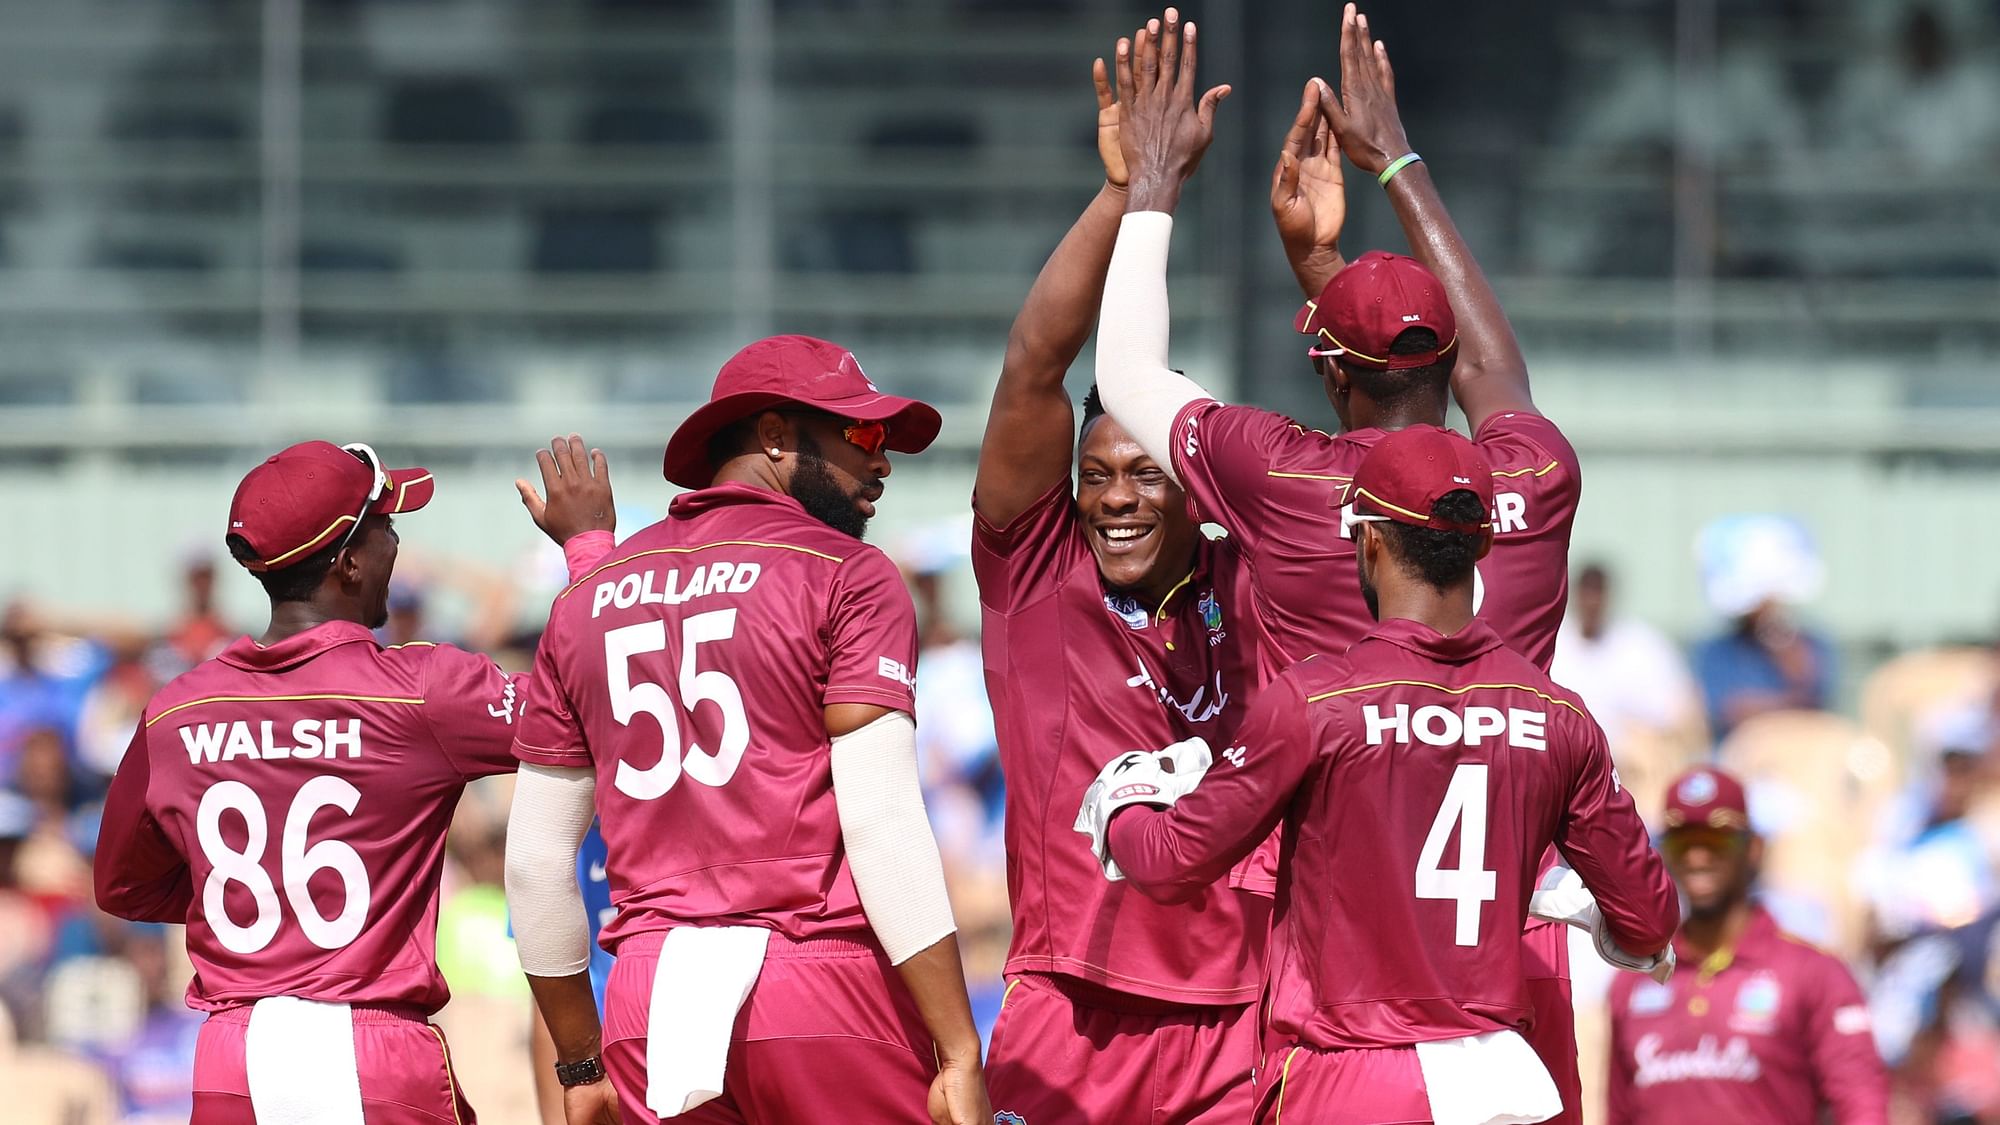 Many former cricketers and fans took to twitter to congratulate West Indies for their dominating performance against India.